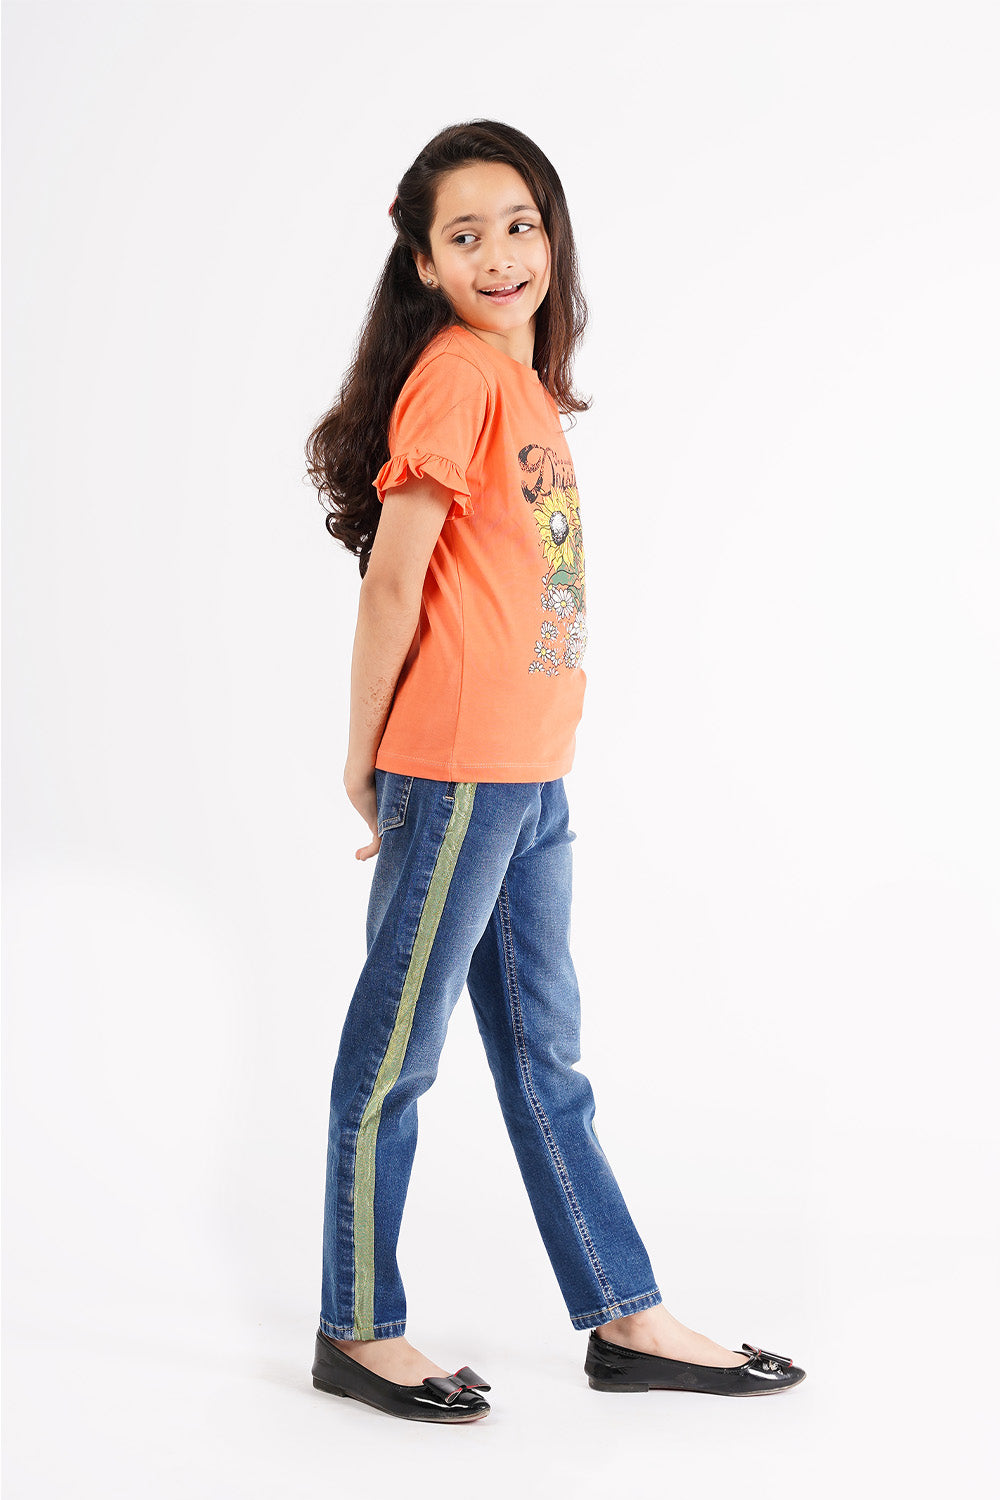 Girl's Fashion Jeans